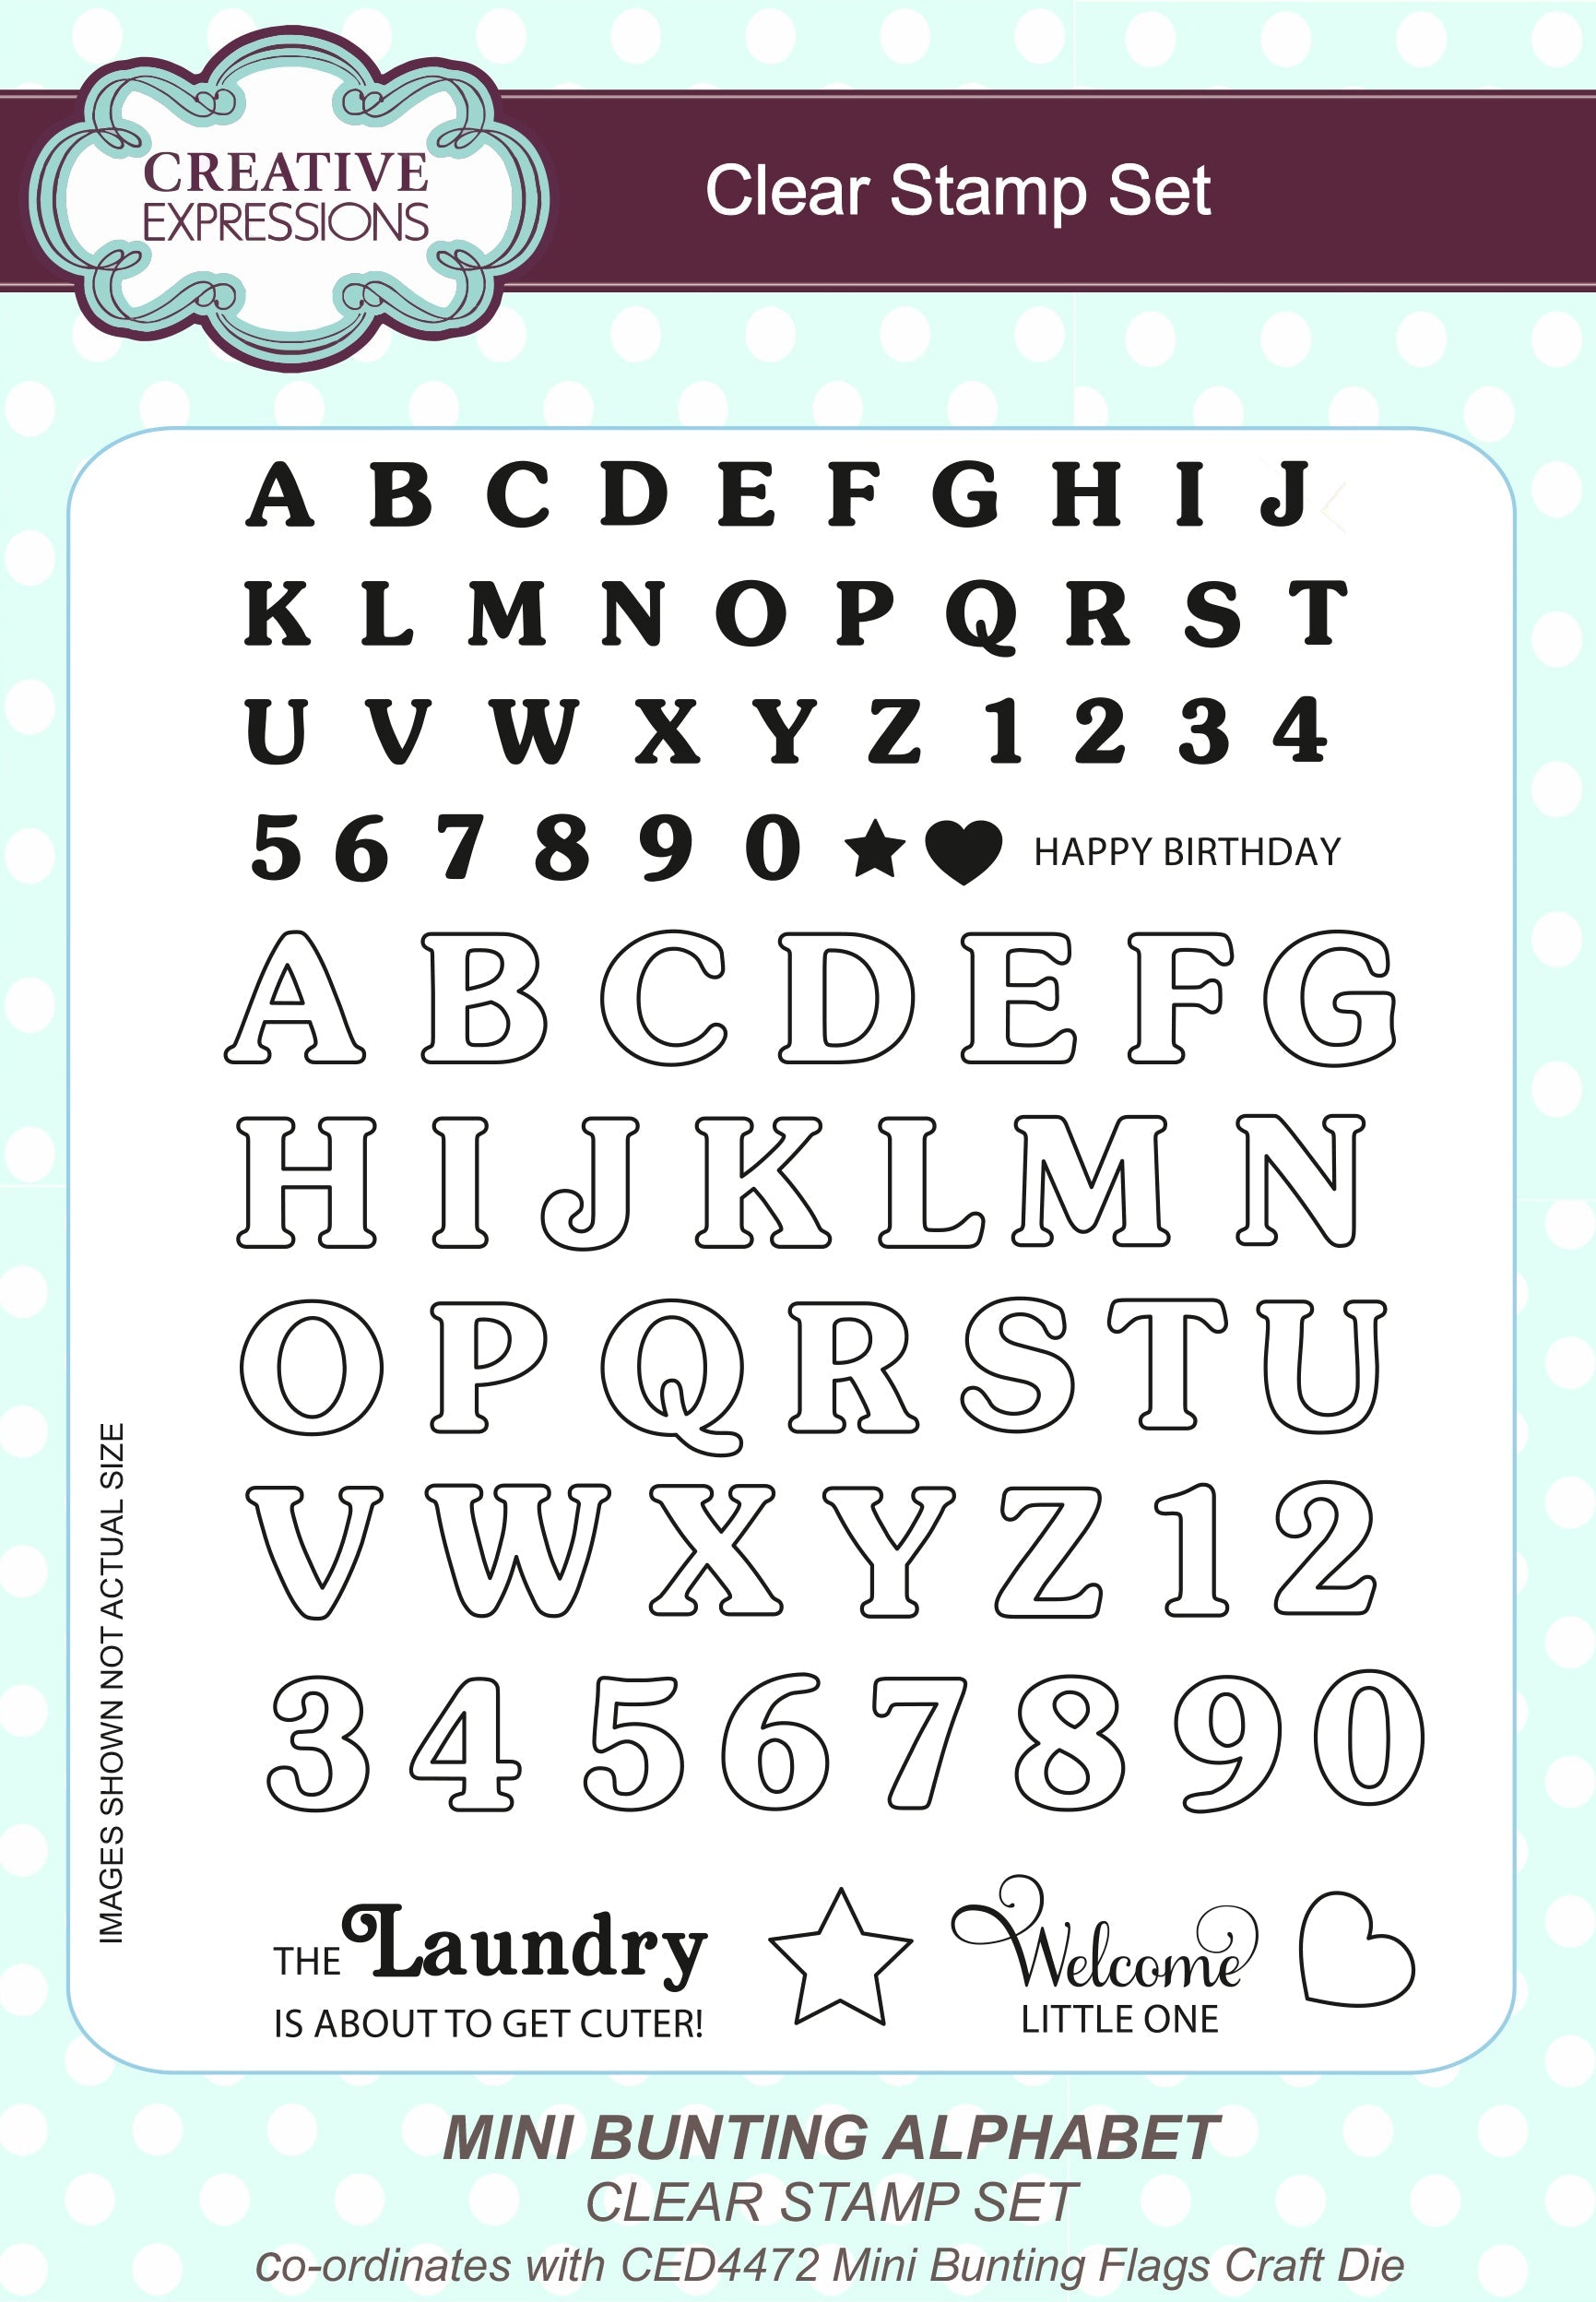 Creative Expressions Sue Wilson Mini Bunting Alphabet 6 in x 8 in Clear Stamp Set